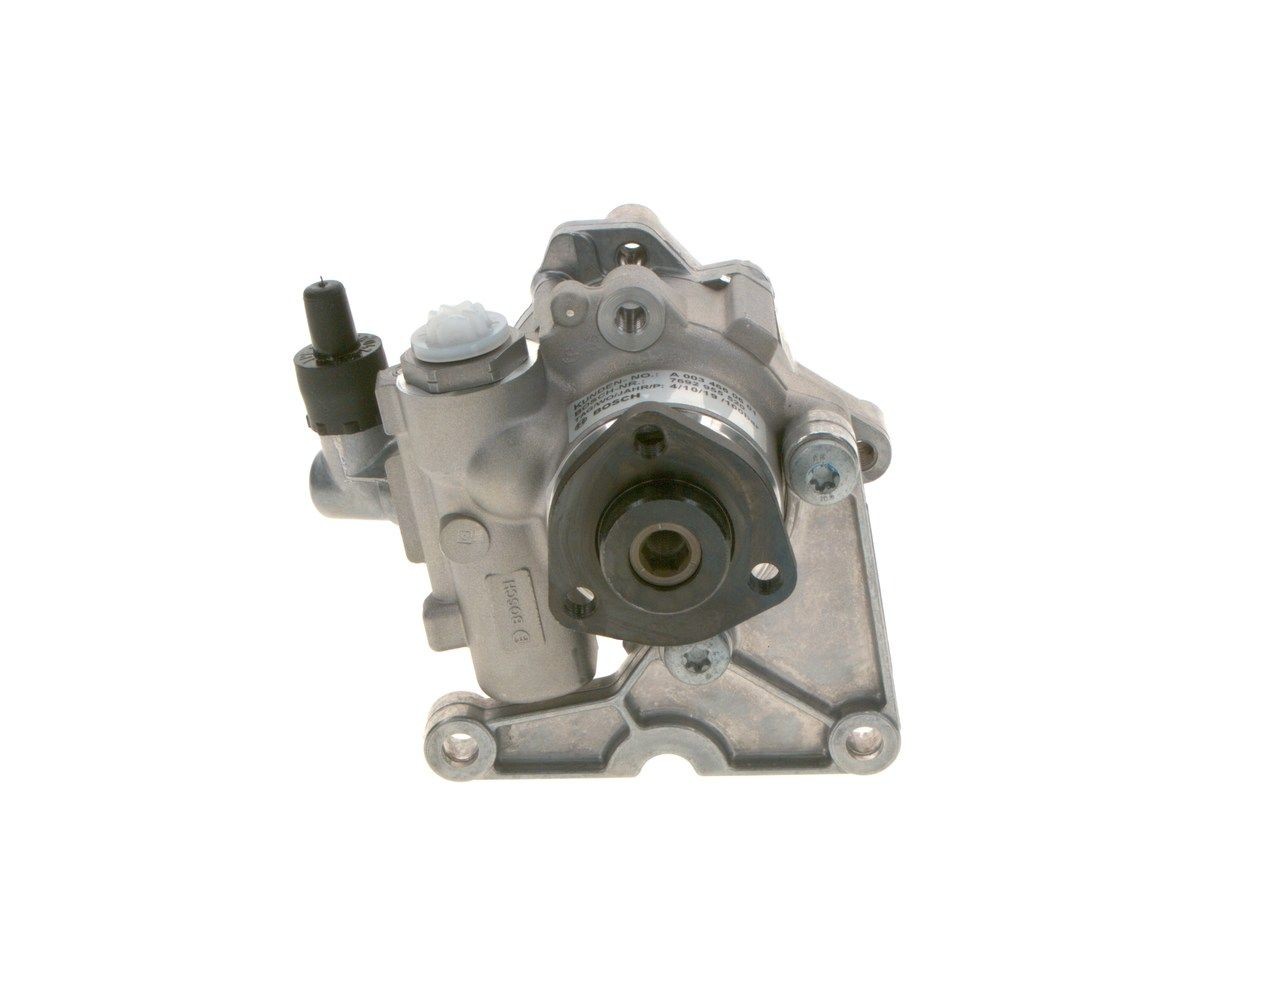 BOSCH Hydraulic steering pump K S00 000 630 suitable for ML W163